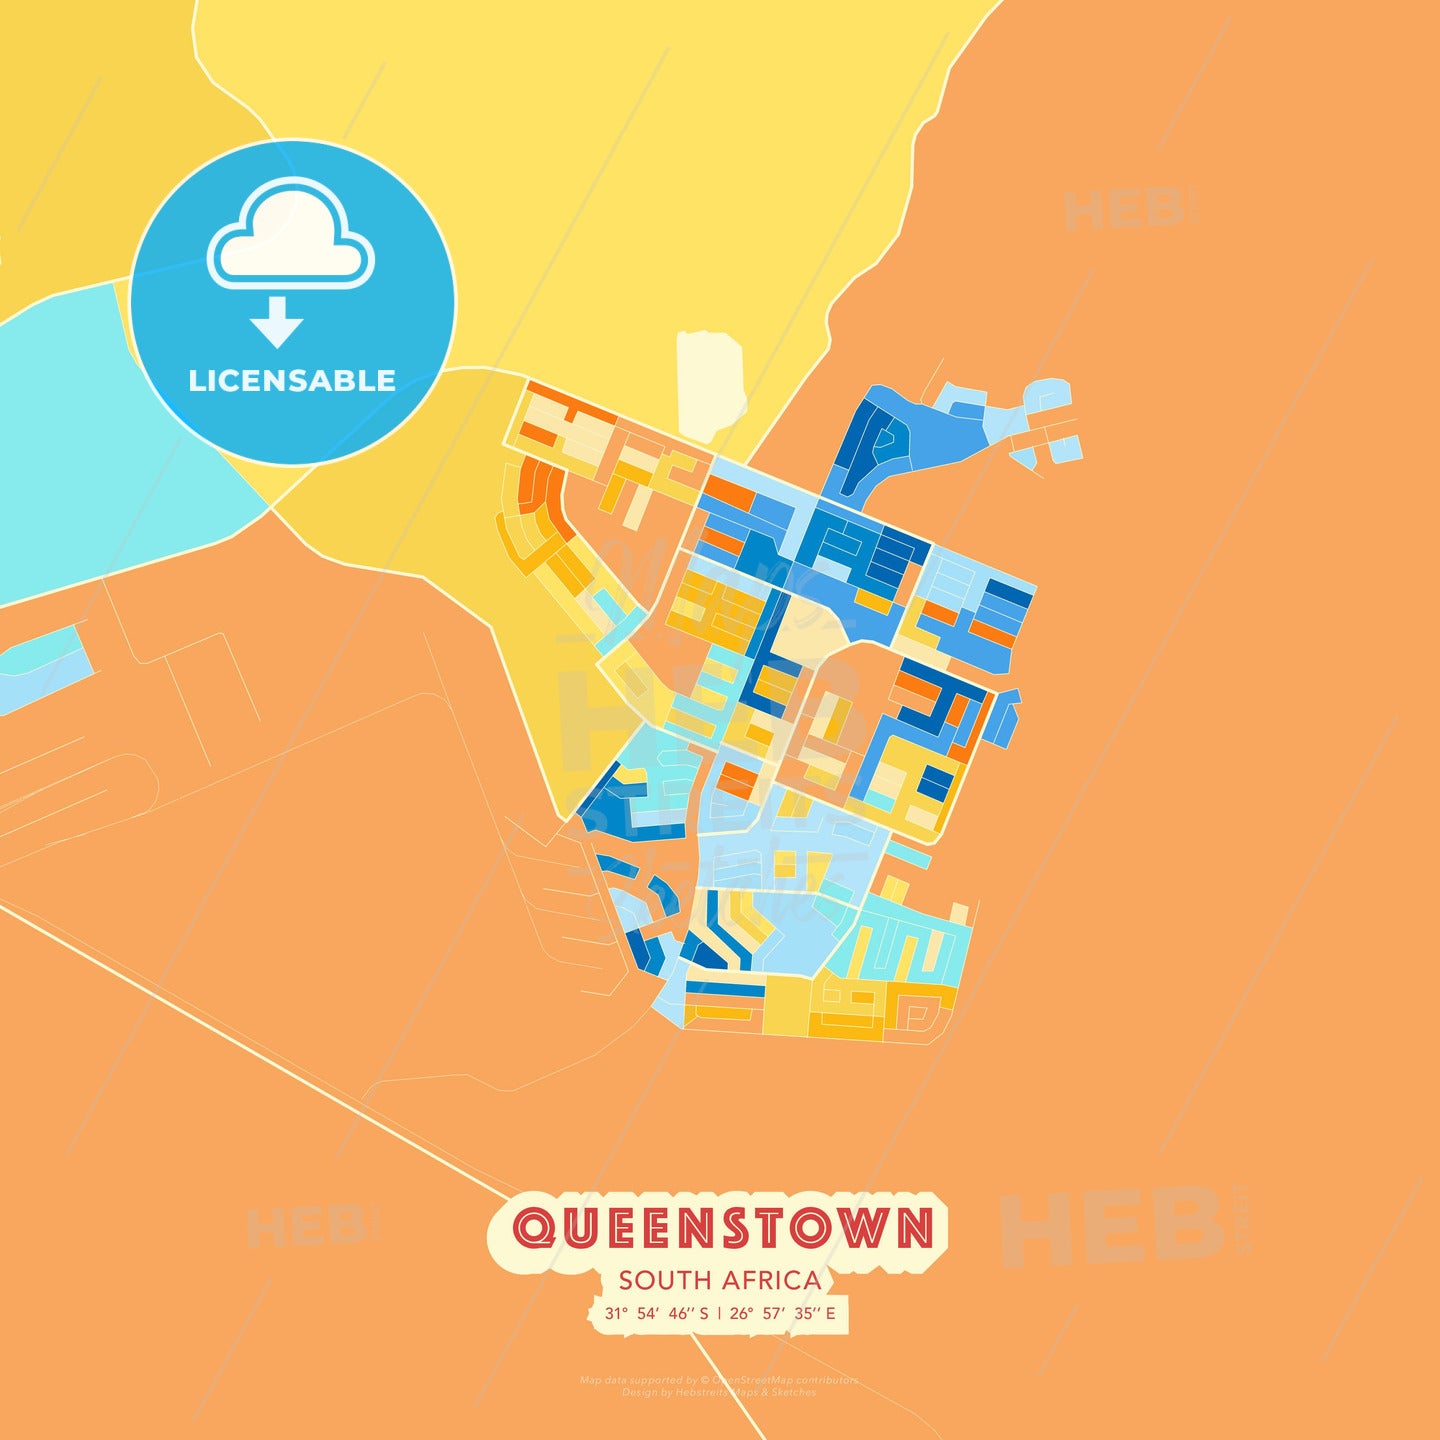 Queenstown, South Africa, map - HEBSTREITS Sketches